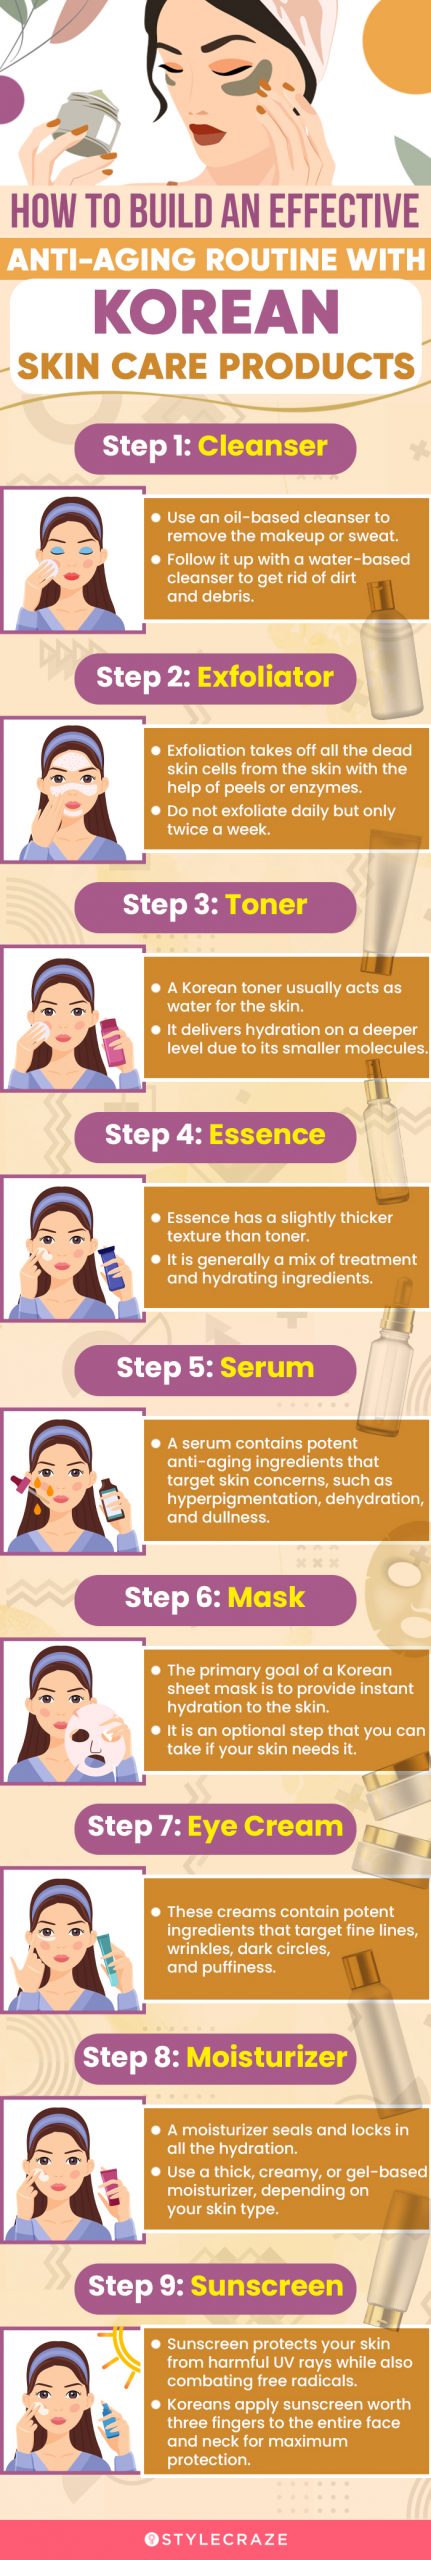 How To Build An Effective Anti-Aging Routine With Korean Skin Care Products (infographic)